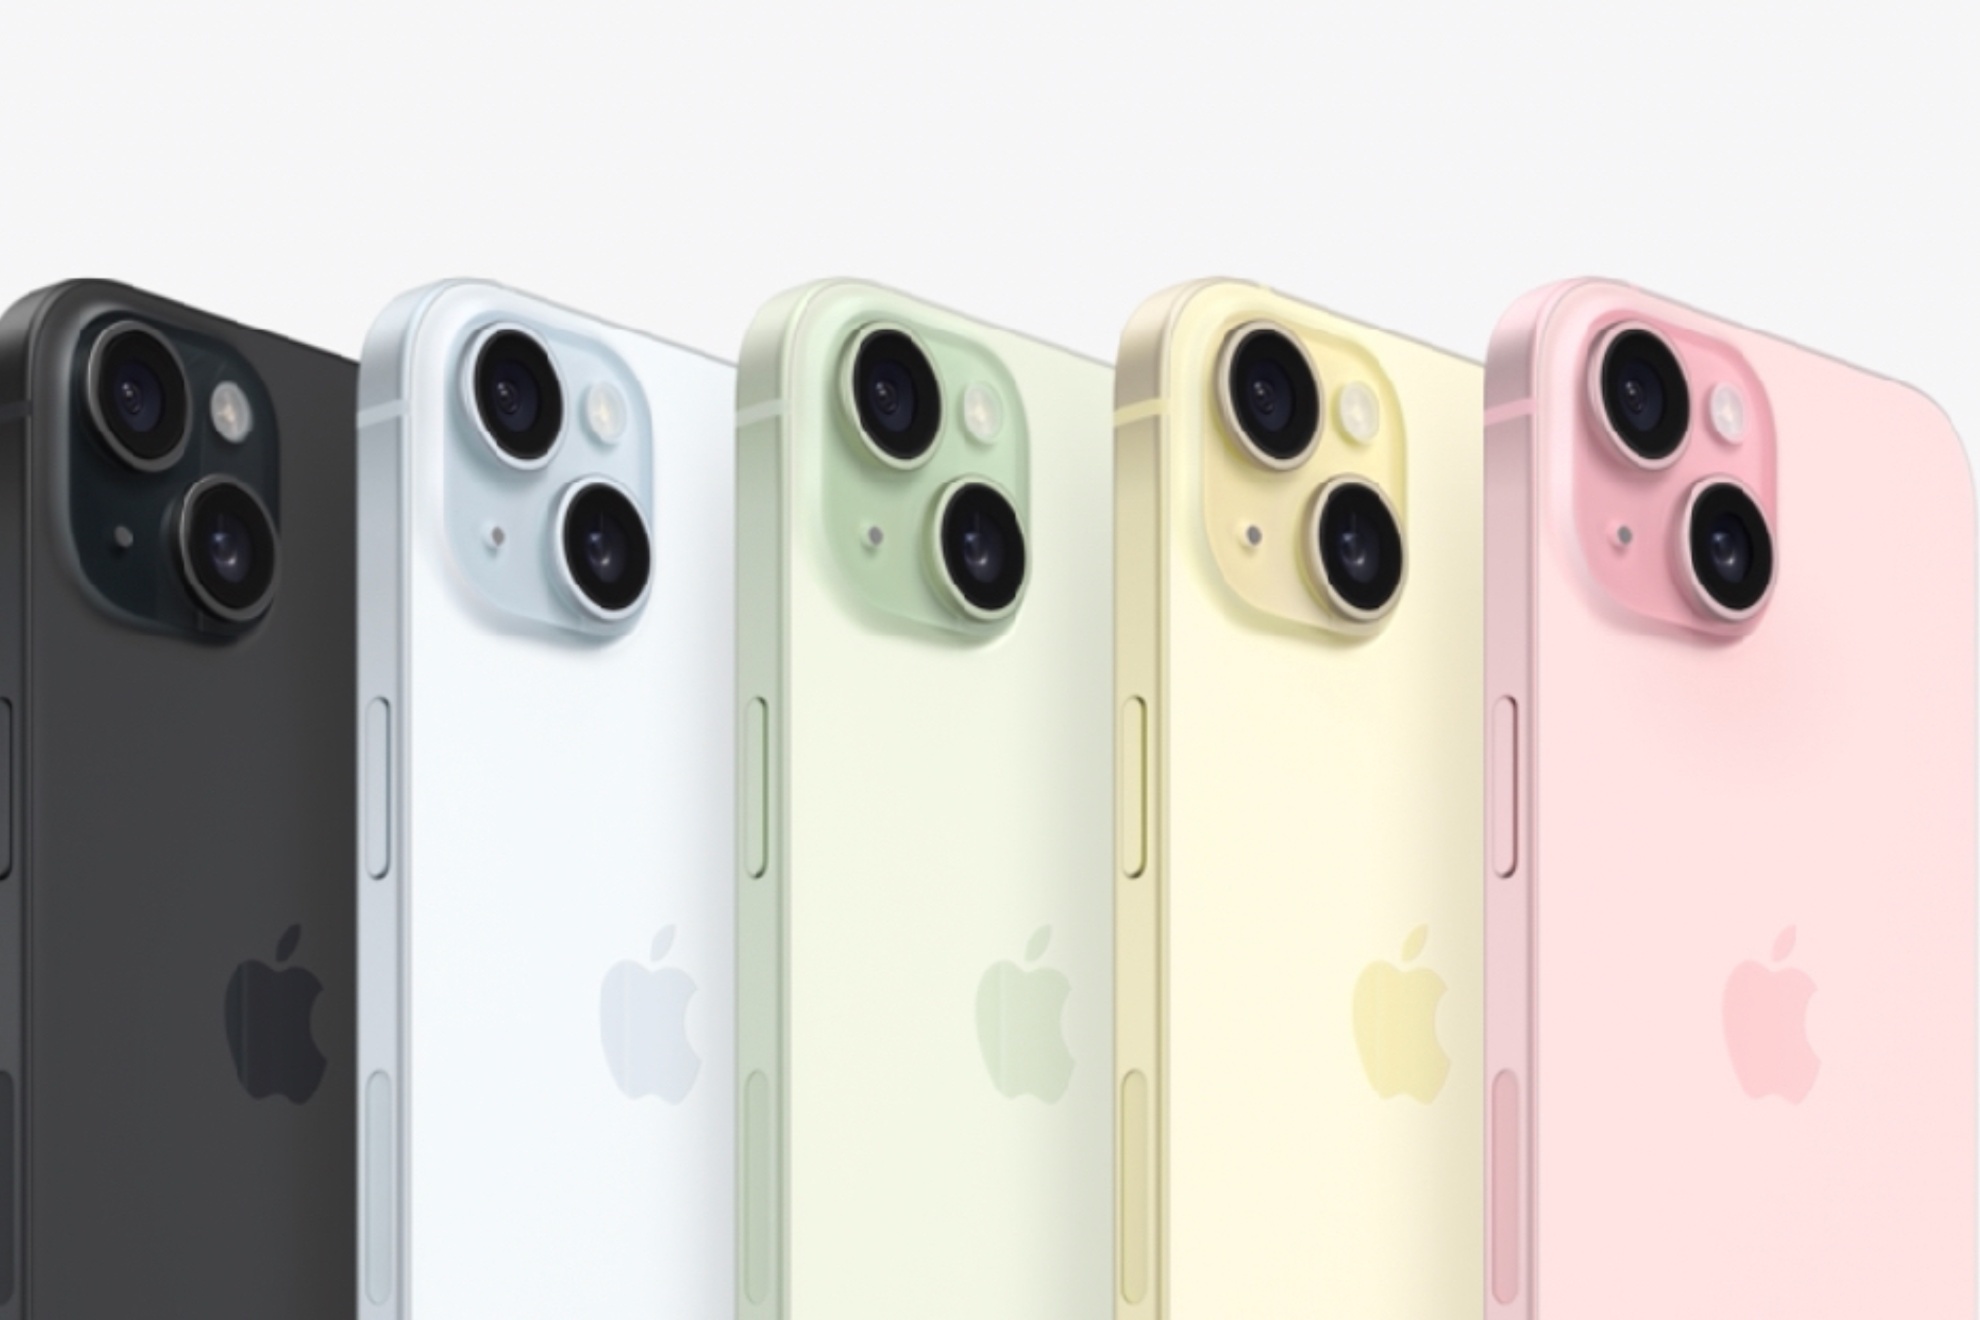 Apple's Iphone 15 has a starting price of $799